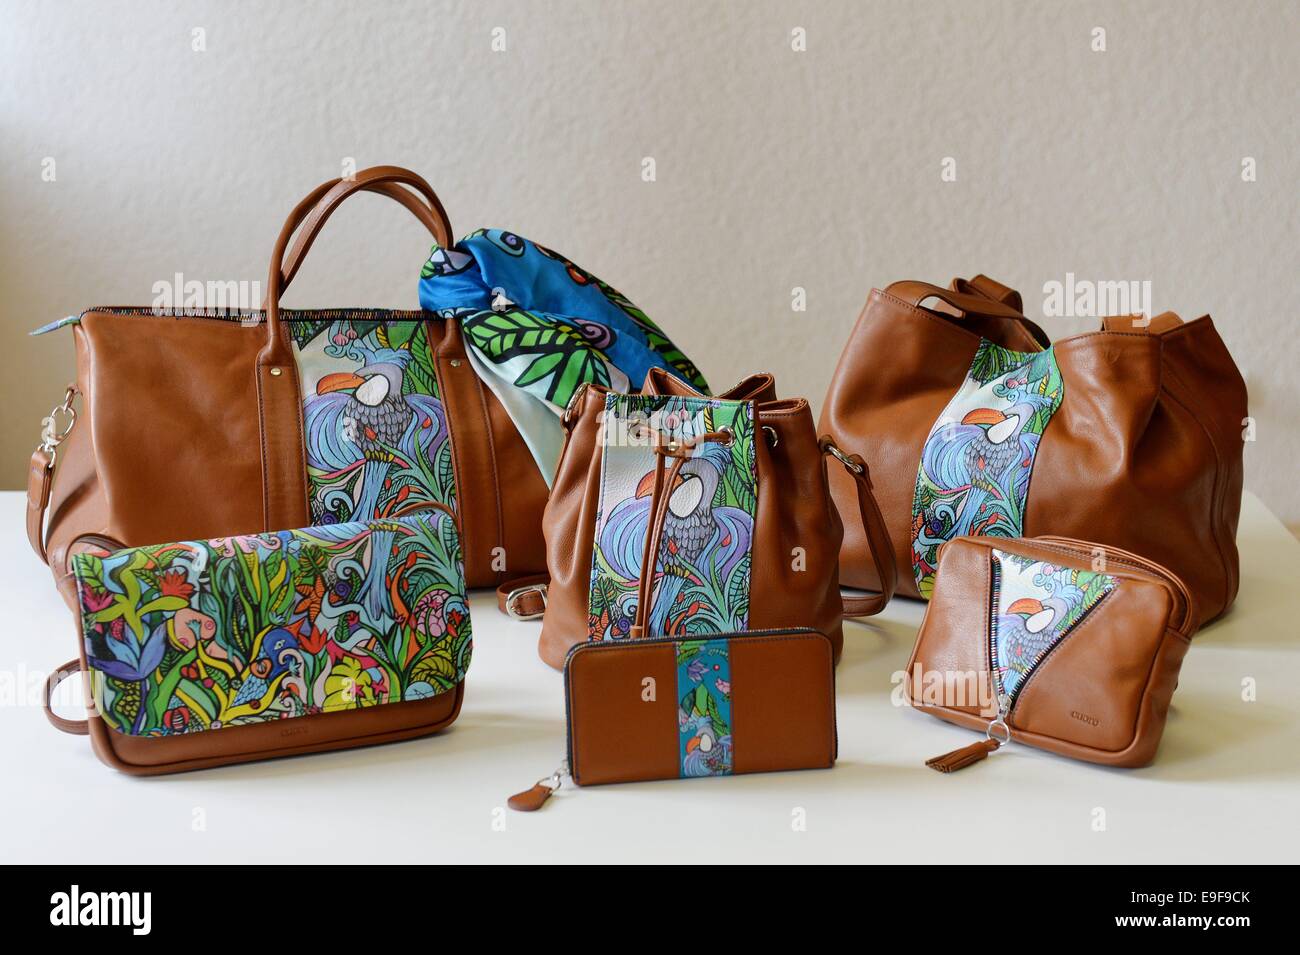 Exclusive: The artist and designer Paola Ezra crugnale paints works of art that are incorporated on handbags and wallets of the company 'Cuore'. The handbags are made in a combination of art and craft. The painted on canvas works by the artist are digitized and printed on the finest Vachette leather. Germany, 21st. October, Photo: Frank May Stock Photo